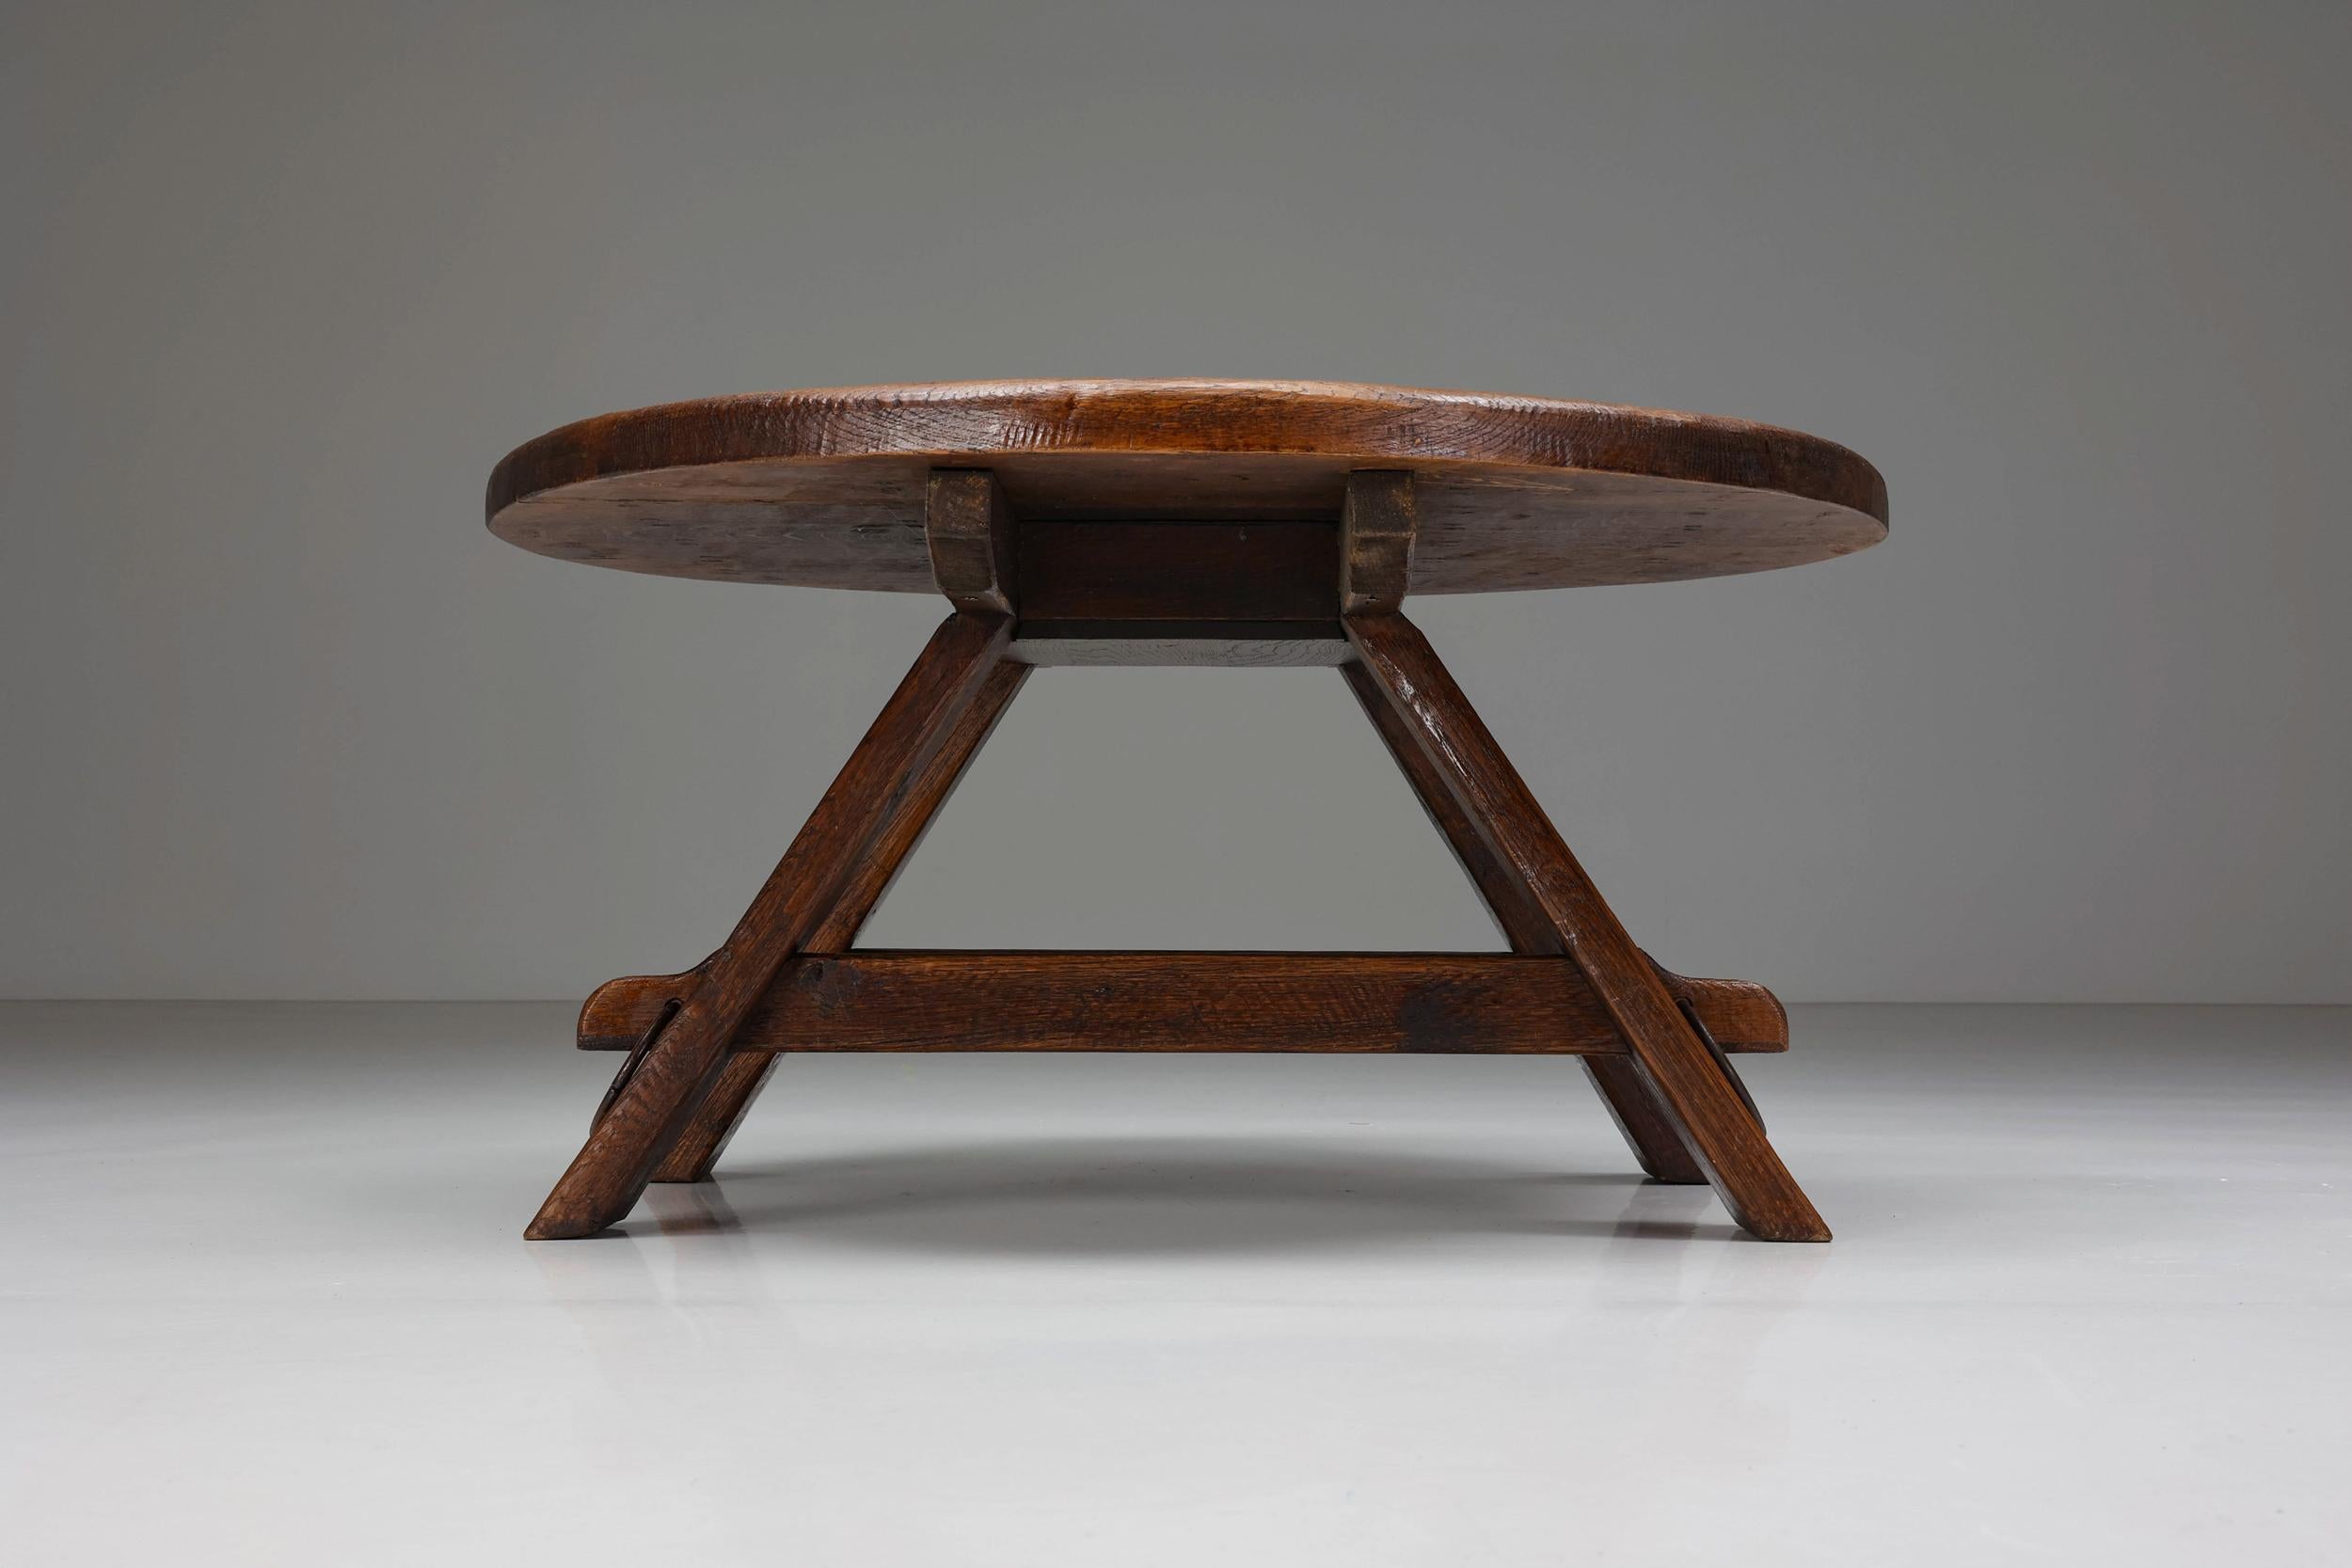 Coffee table; Craftmanship; Wabi-Sabi; Rustic; 1960's; Patina; Rustic furniture; France; 

Rustic round coffee table with ring detail in the middle, a sign of impeccable craftsmanship. Embracing the principles of wabi-sabi, this side table shows